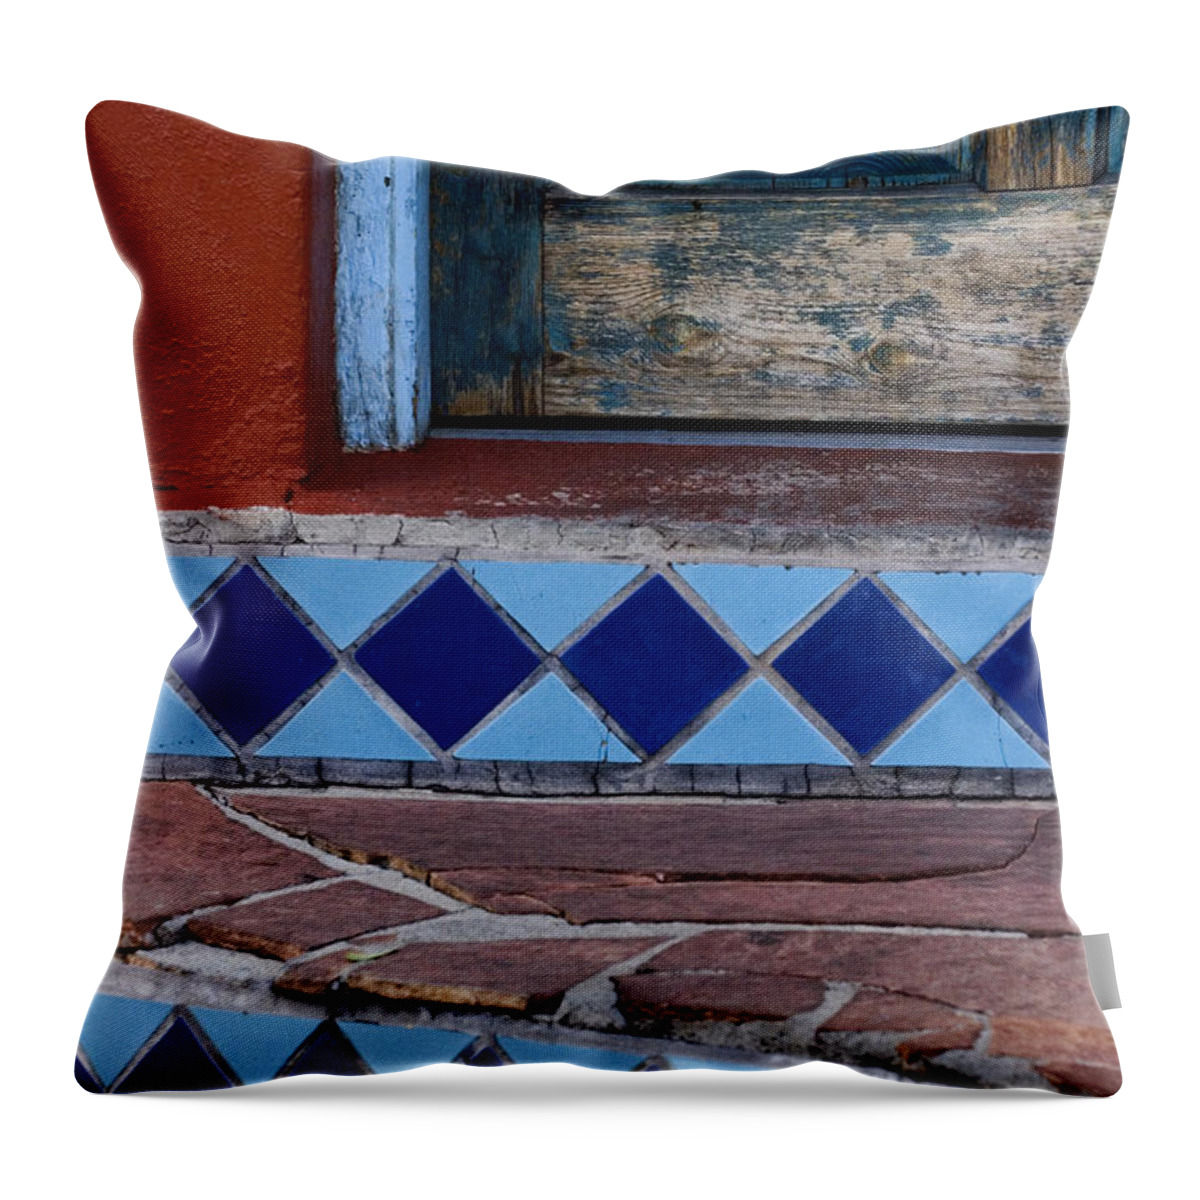 Blue Throw Pillow featuring the photograph Blue Door Colorful Steps Santa Fe by Carol Leigh